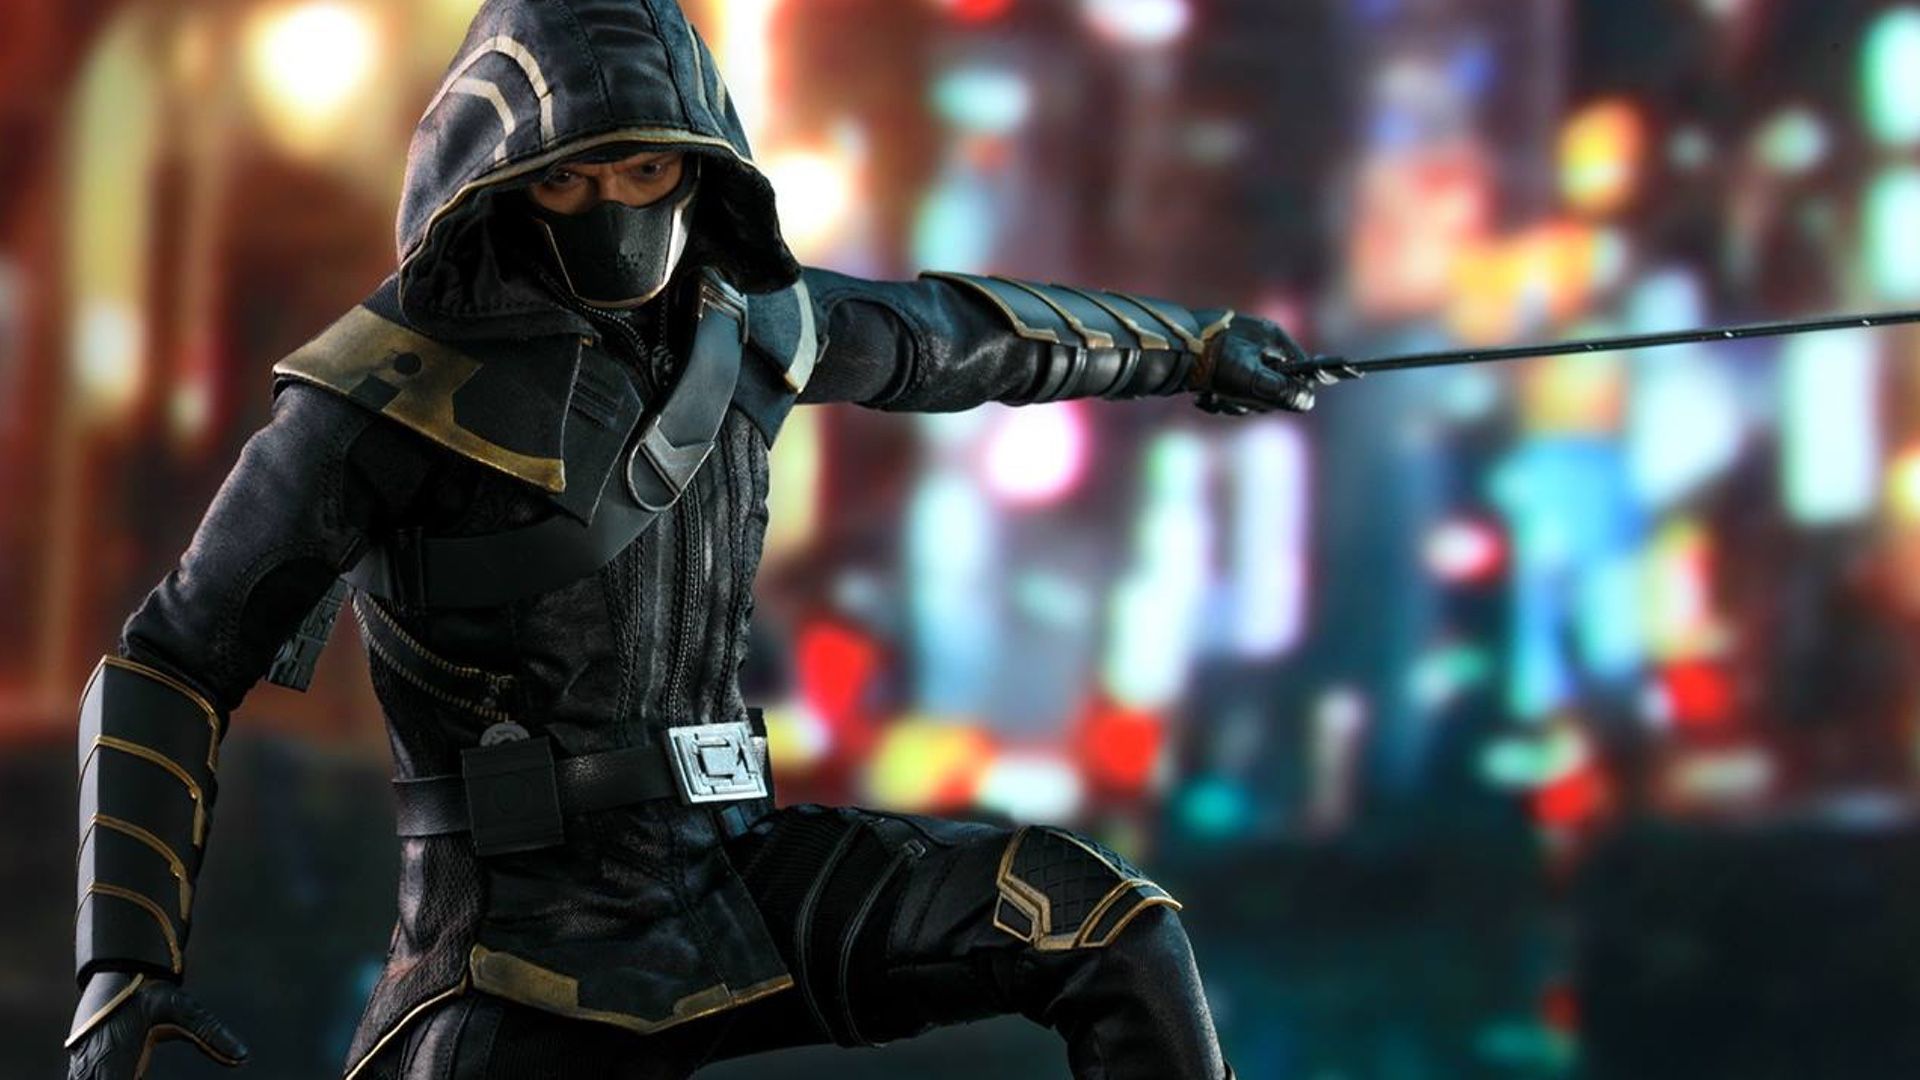 Hot Toys Reveals Their Awesome Hawkeye Ronin Action Figure For AVENGERS: ENDGAME